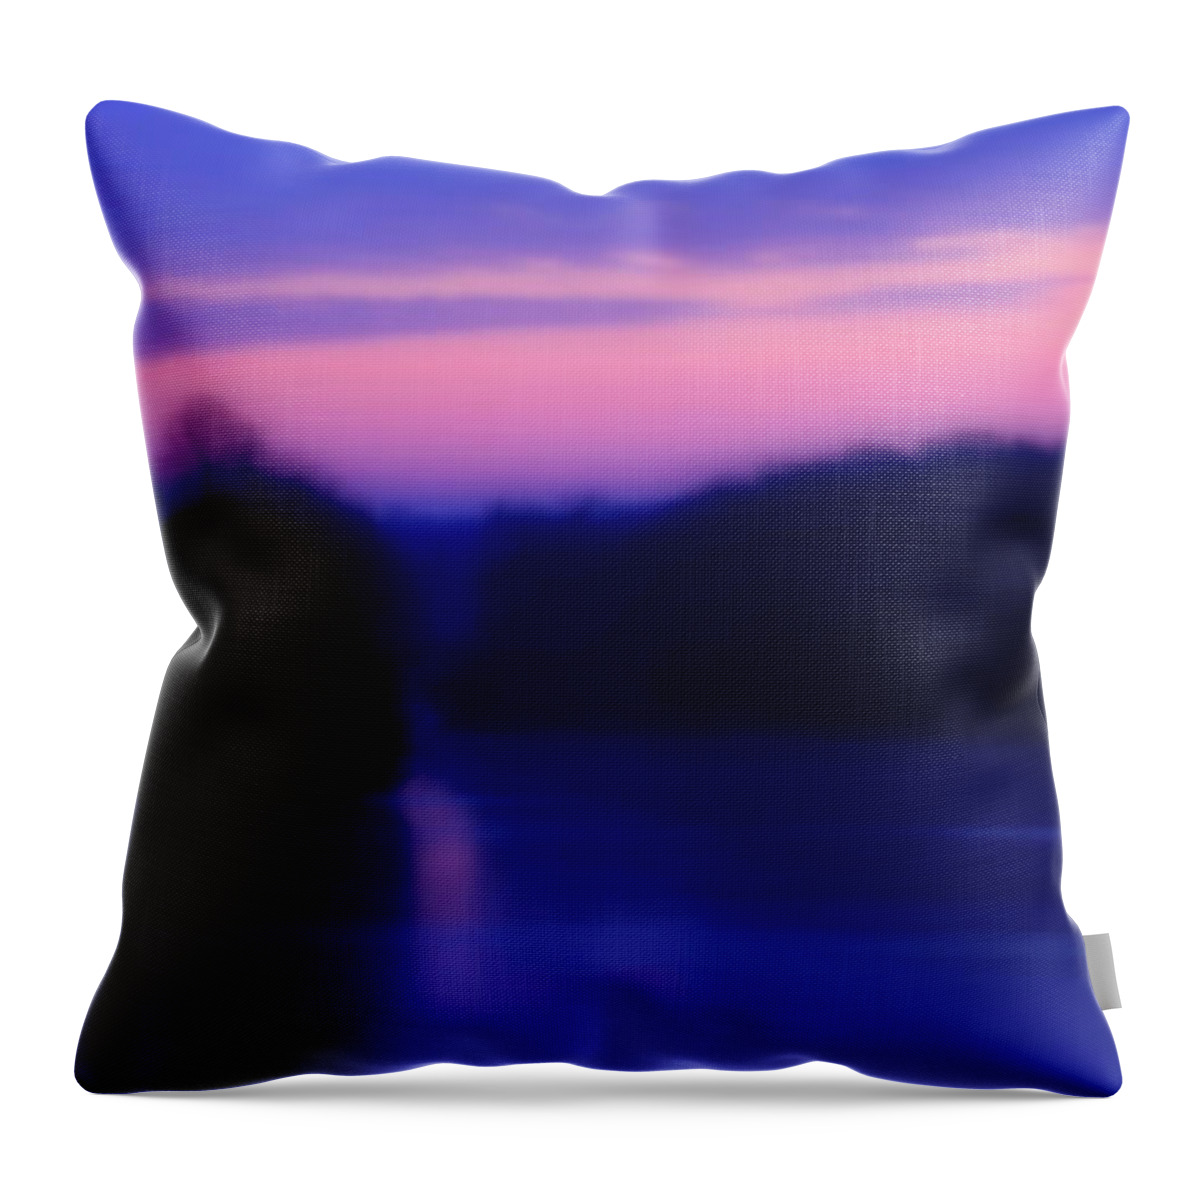 Minnesota Throw Pillow featuring the photograph I Know Places by Cynthia Dickinson